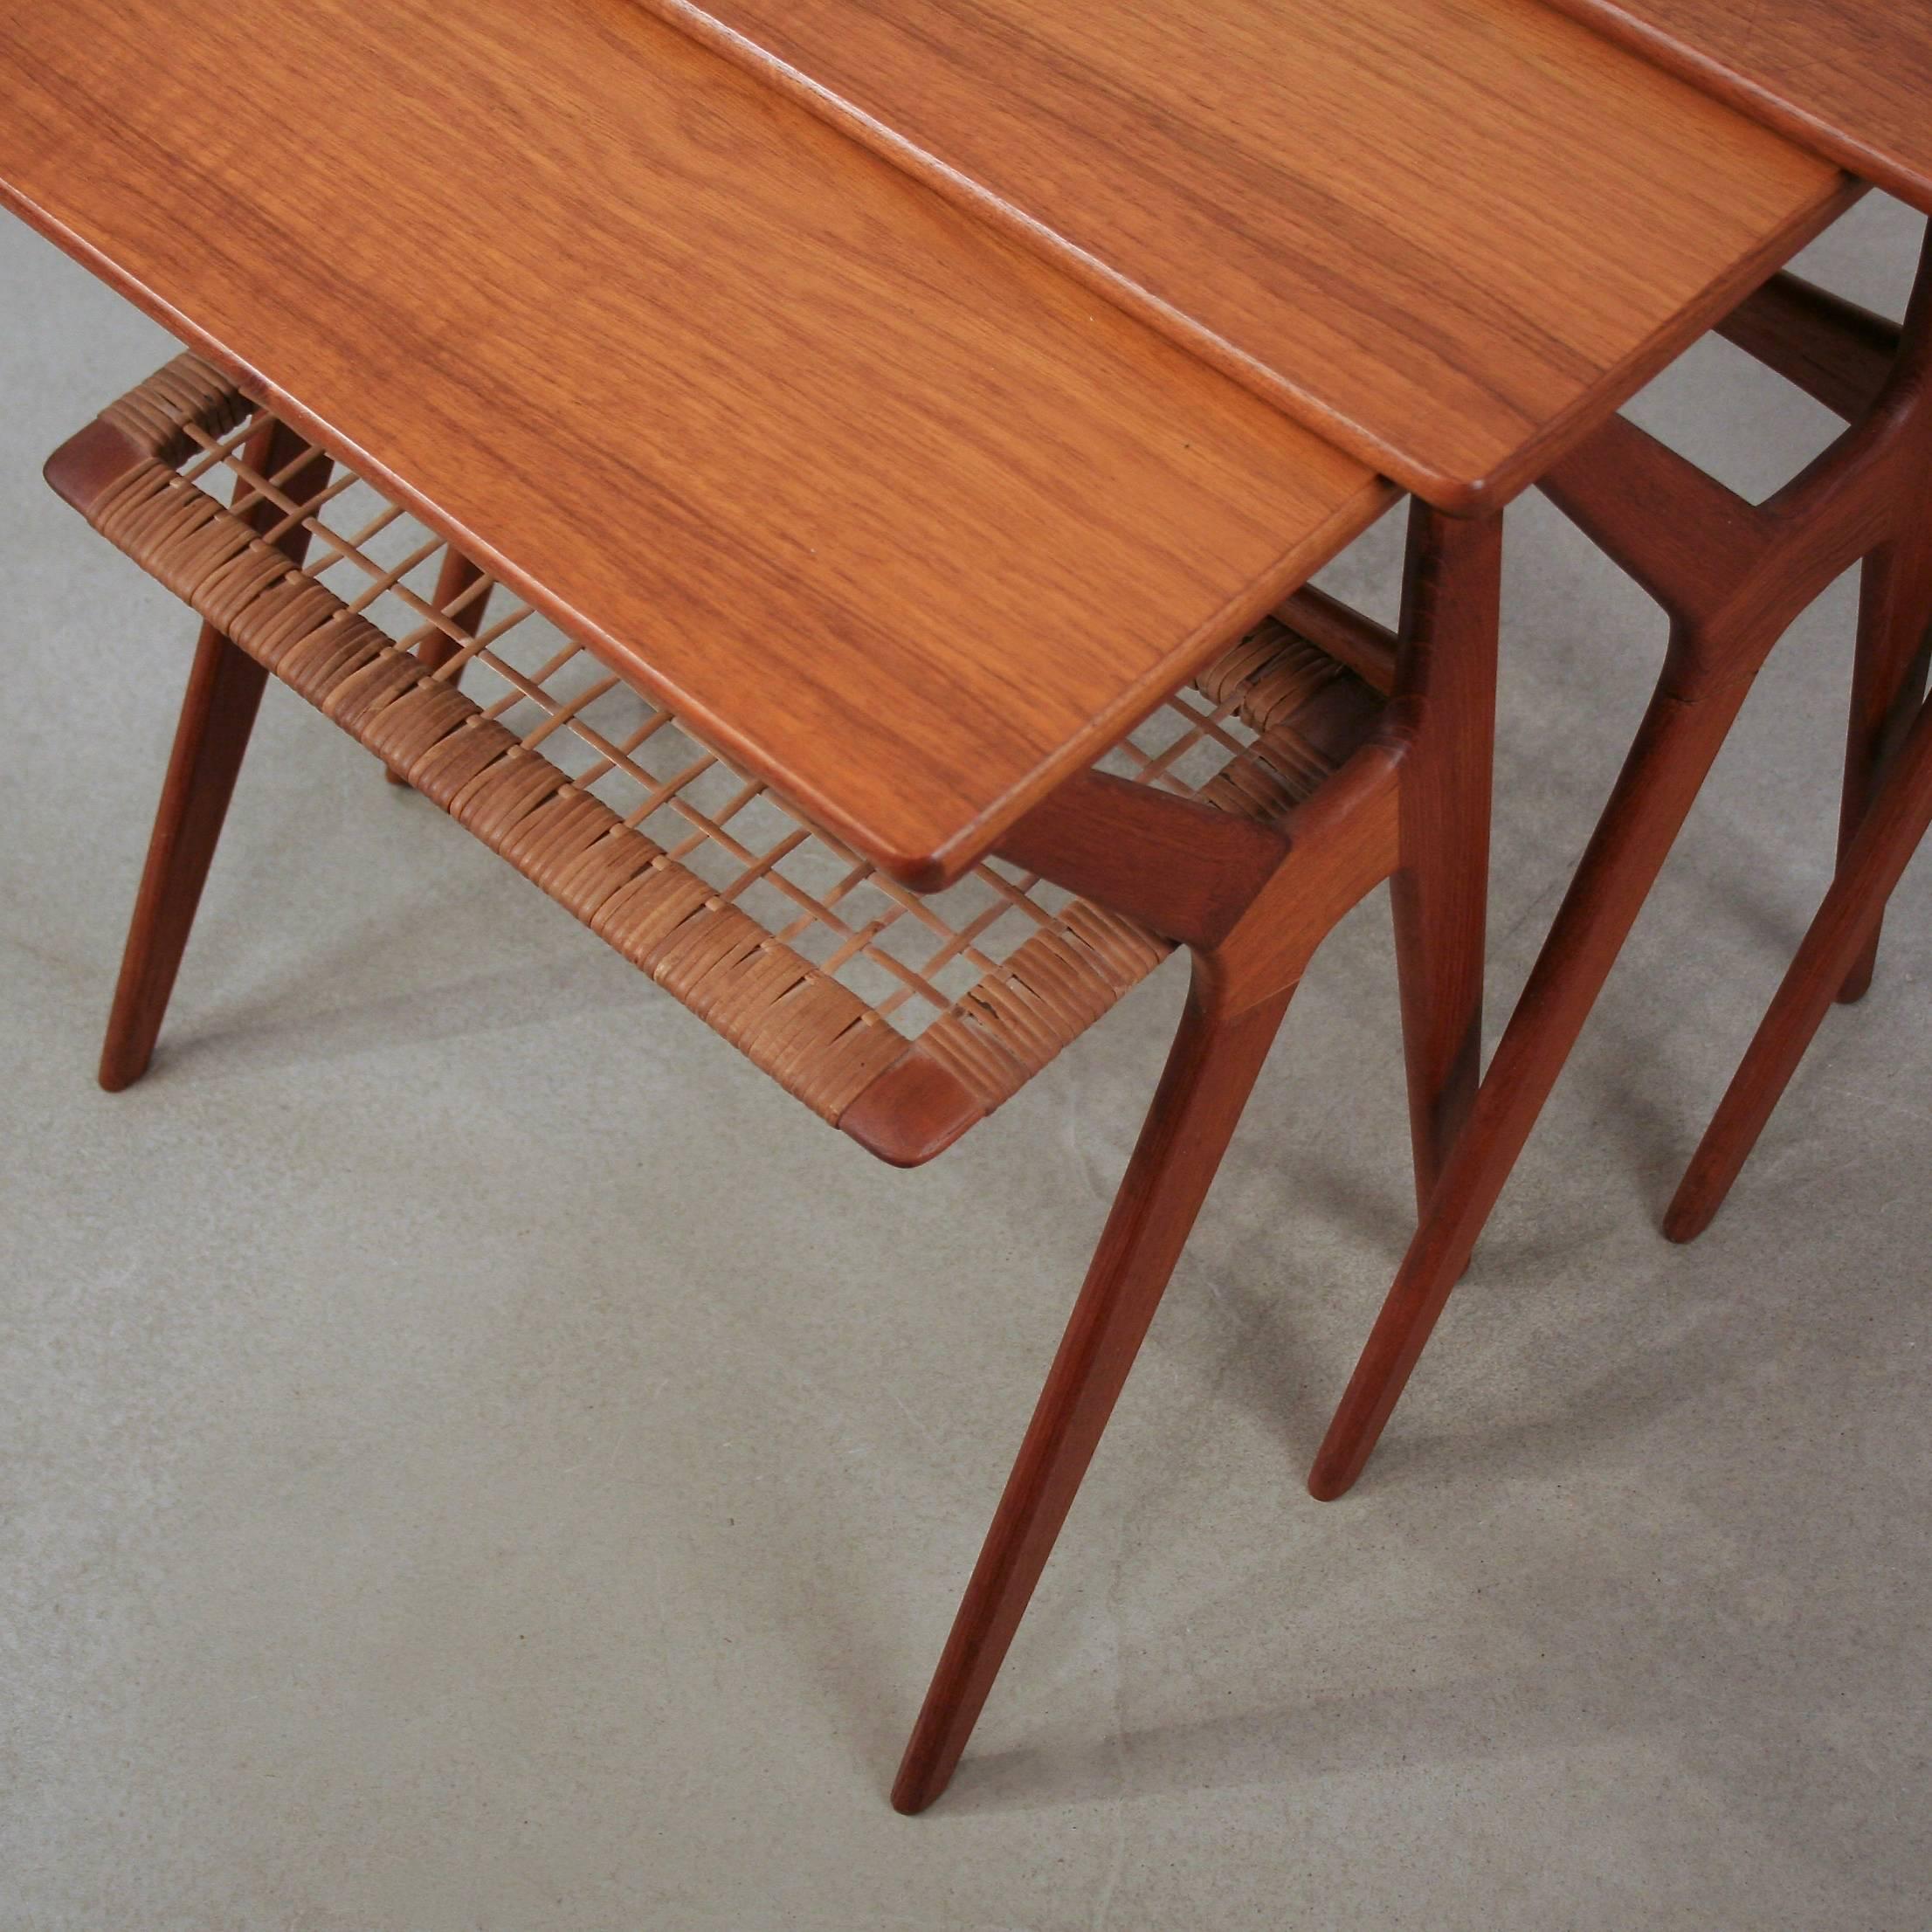 Mid-20th Century Vintage Danish Teak and Cane Nesting Tables For Sale